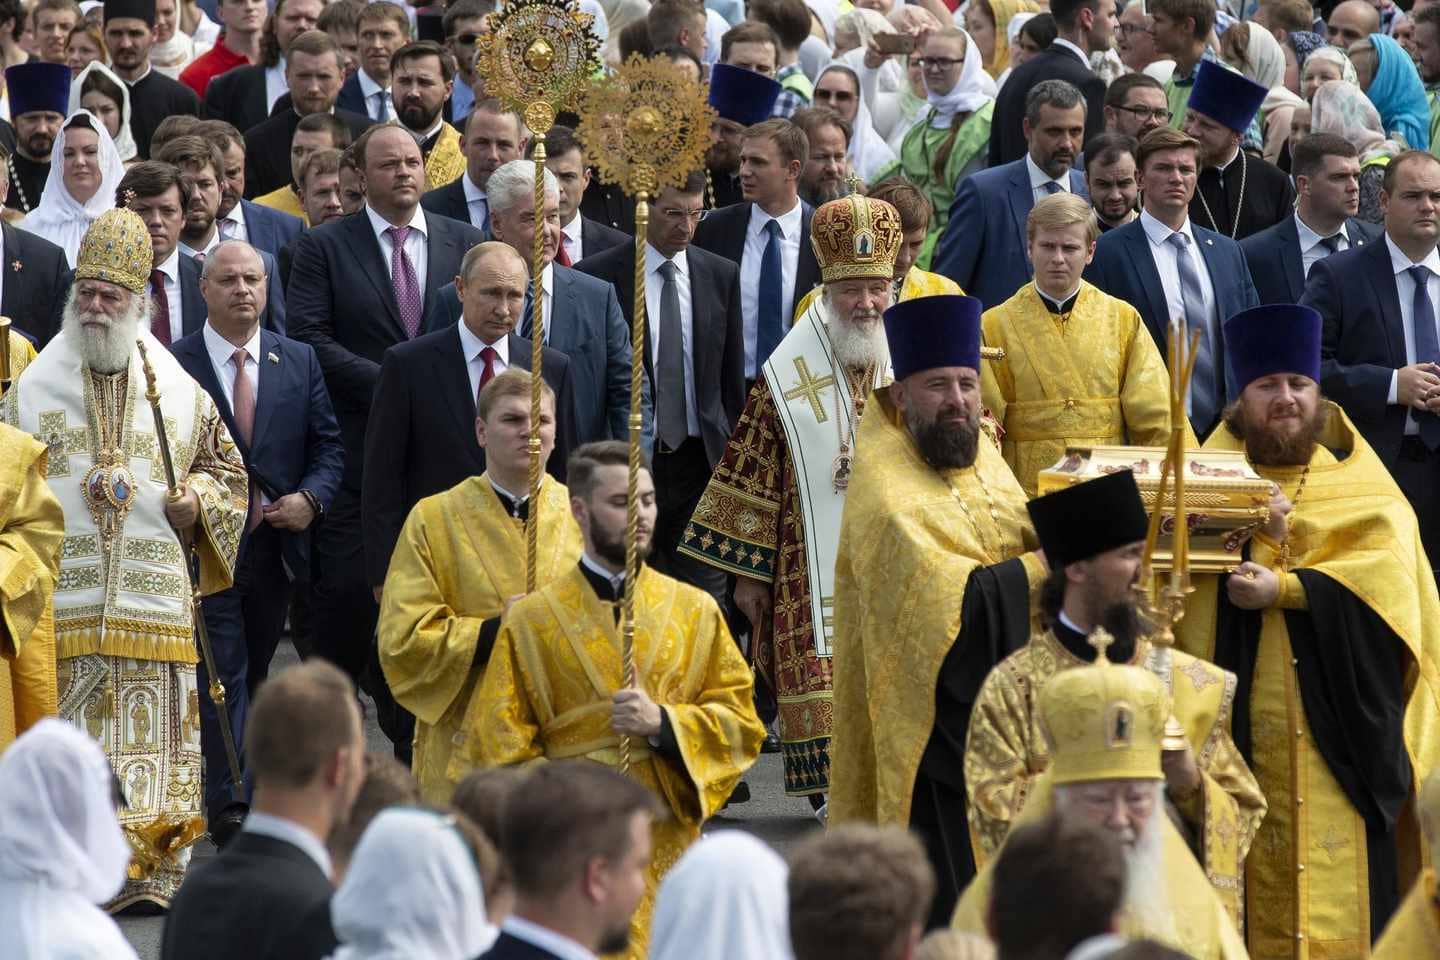 Putin surrounded by Clerics.